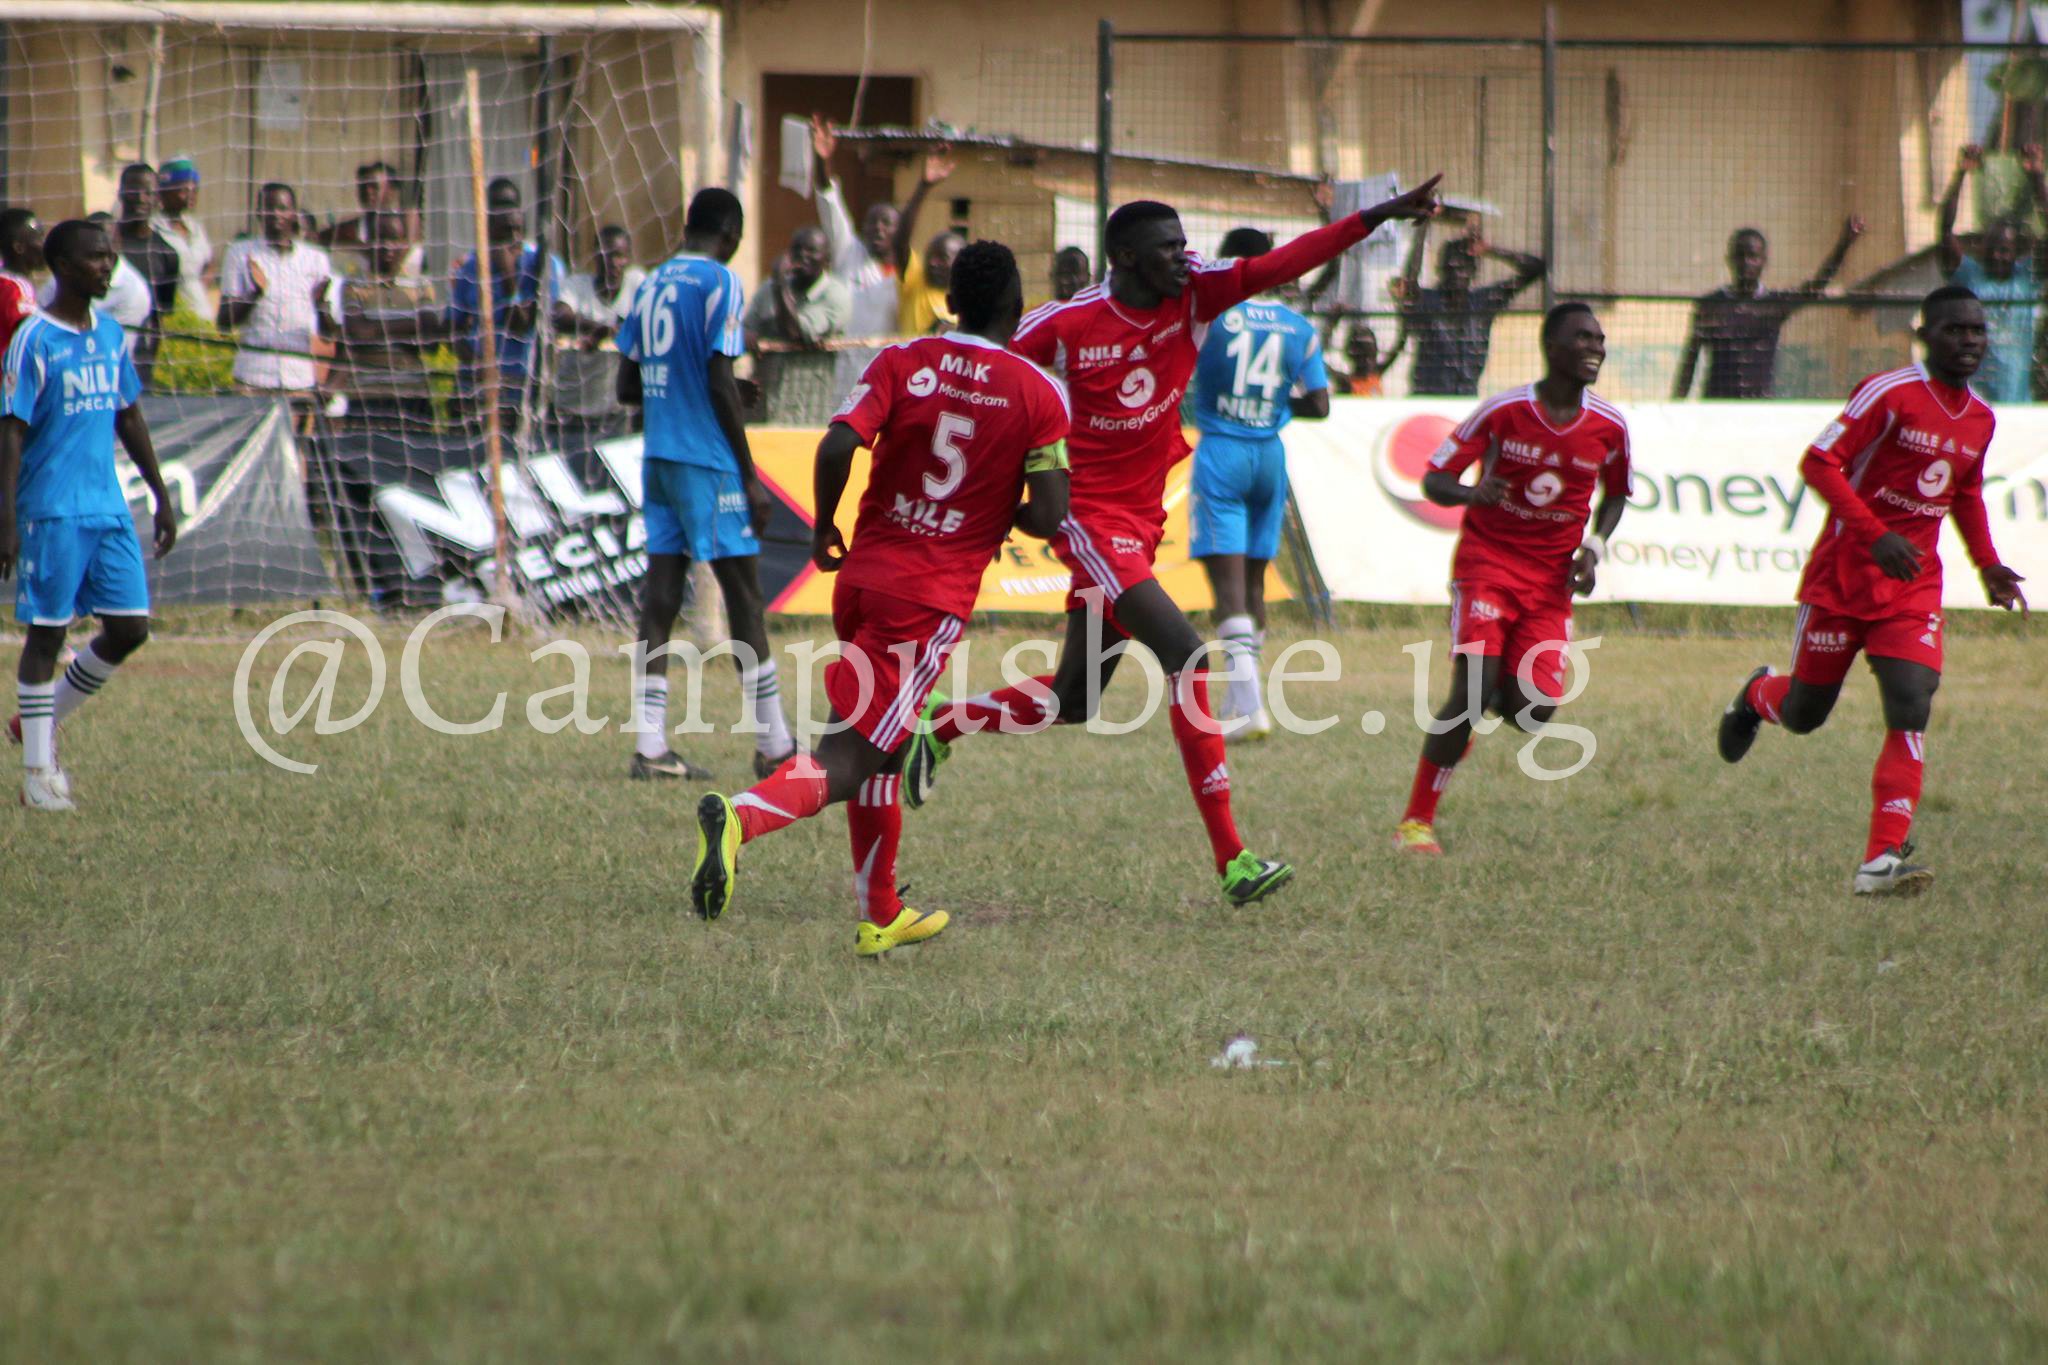 MAK's Lubwama Joshua celebrating after scoring his three kick in second round, with two minutes left to the last whistle